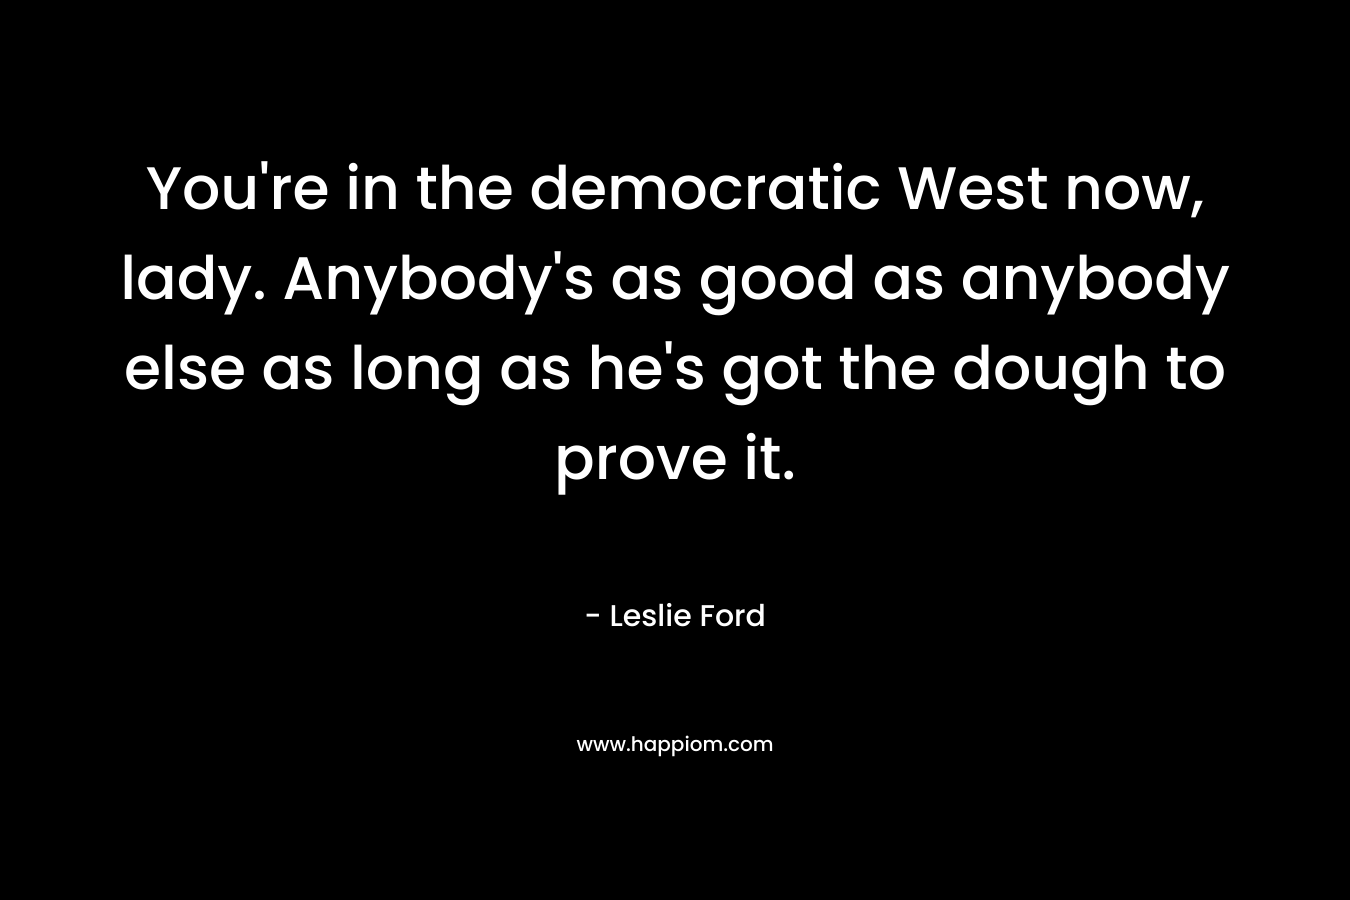 You’re in the democratic West now, lady. Anybody’s as good as anybody else as long as he’s got the dough to prove it. – Leslie Ford